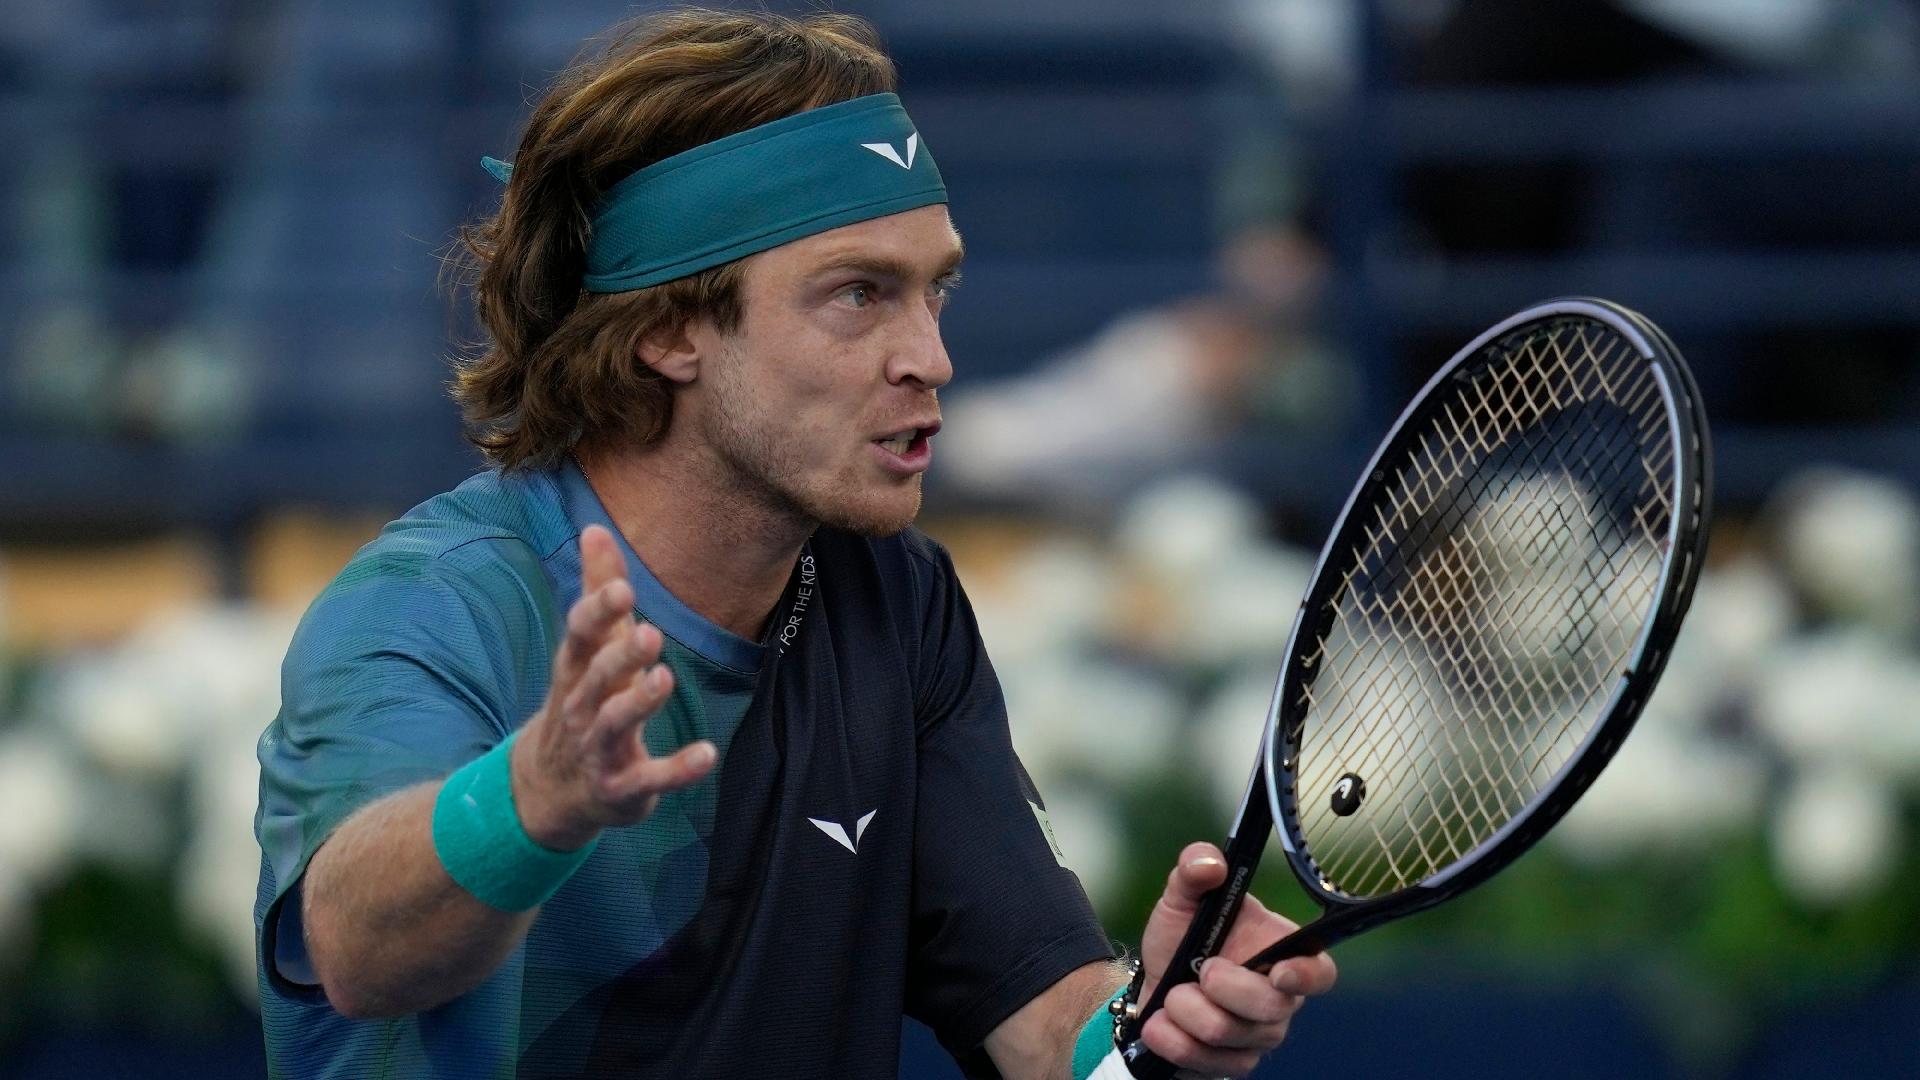 Andrey Rublev defaulted for allegedly abusing line judge at Dubai Open